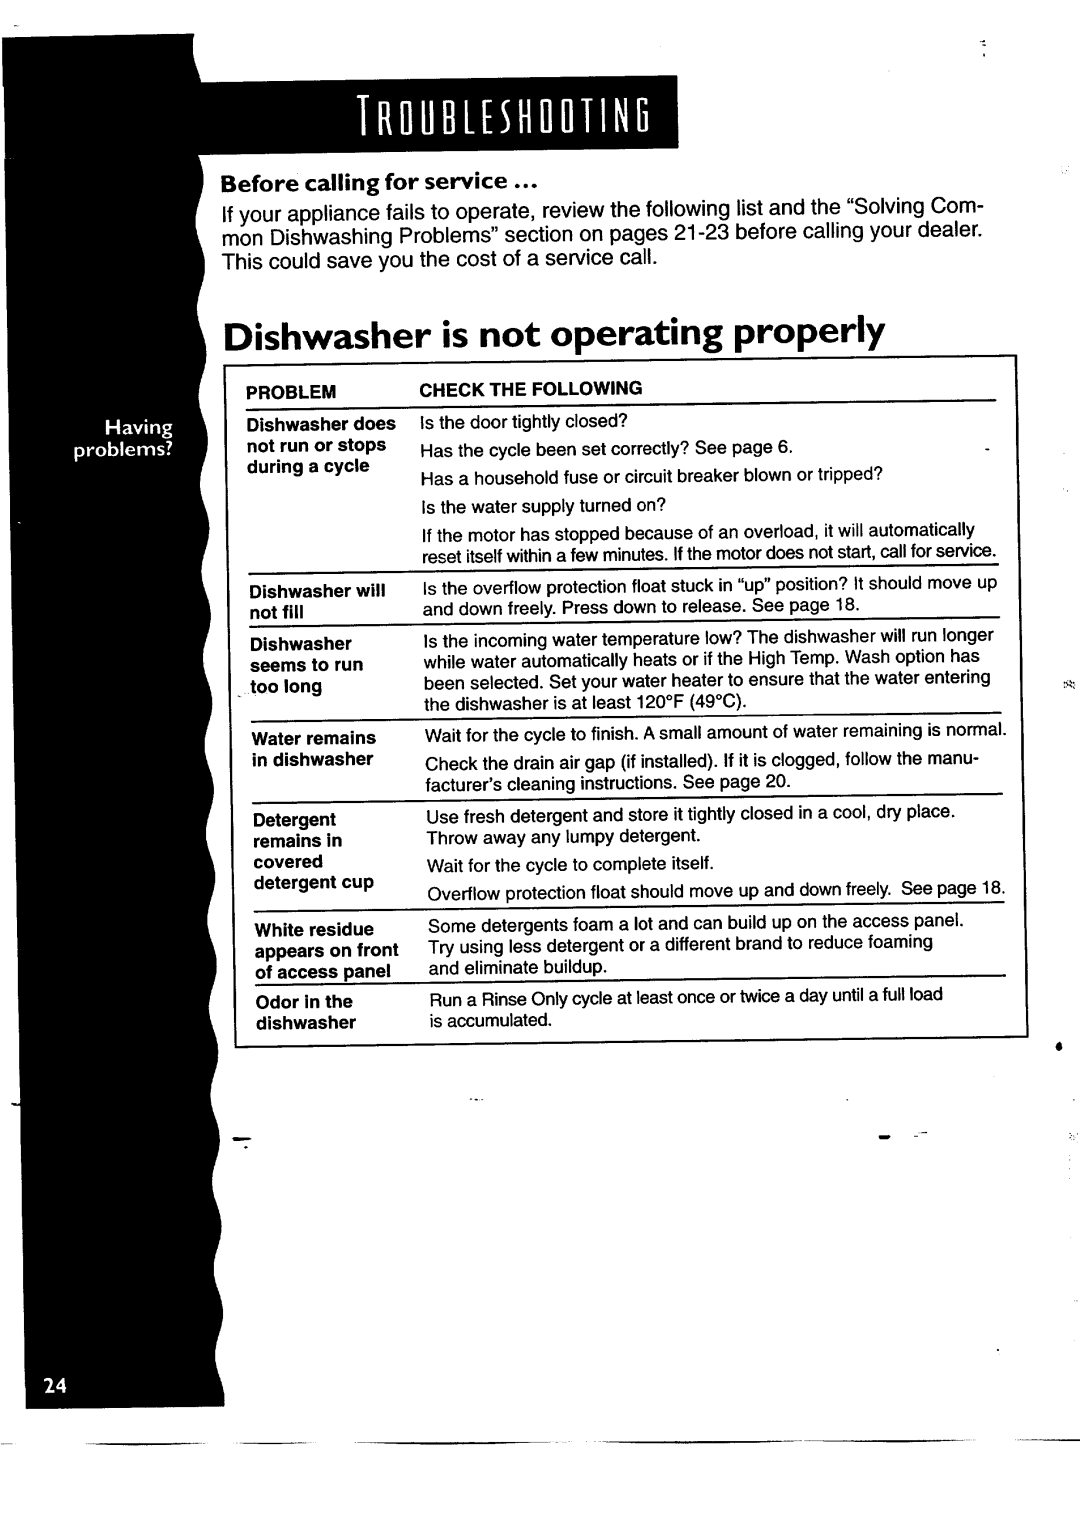 KitchenAid KUDH24SE manual Dishwasher is not operating properly, Before calling for service 